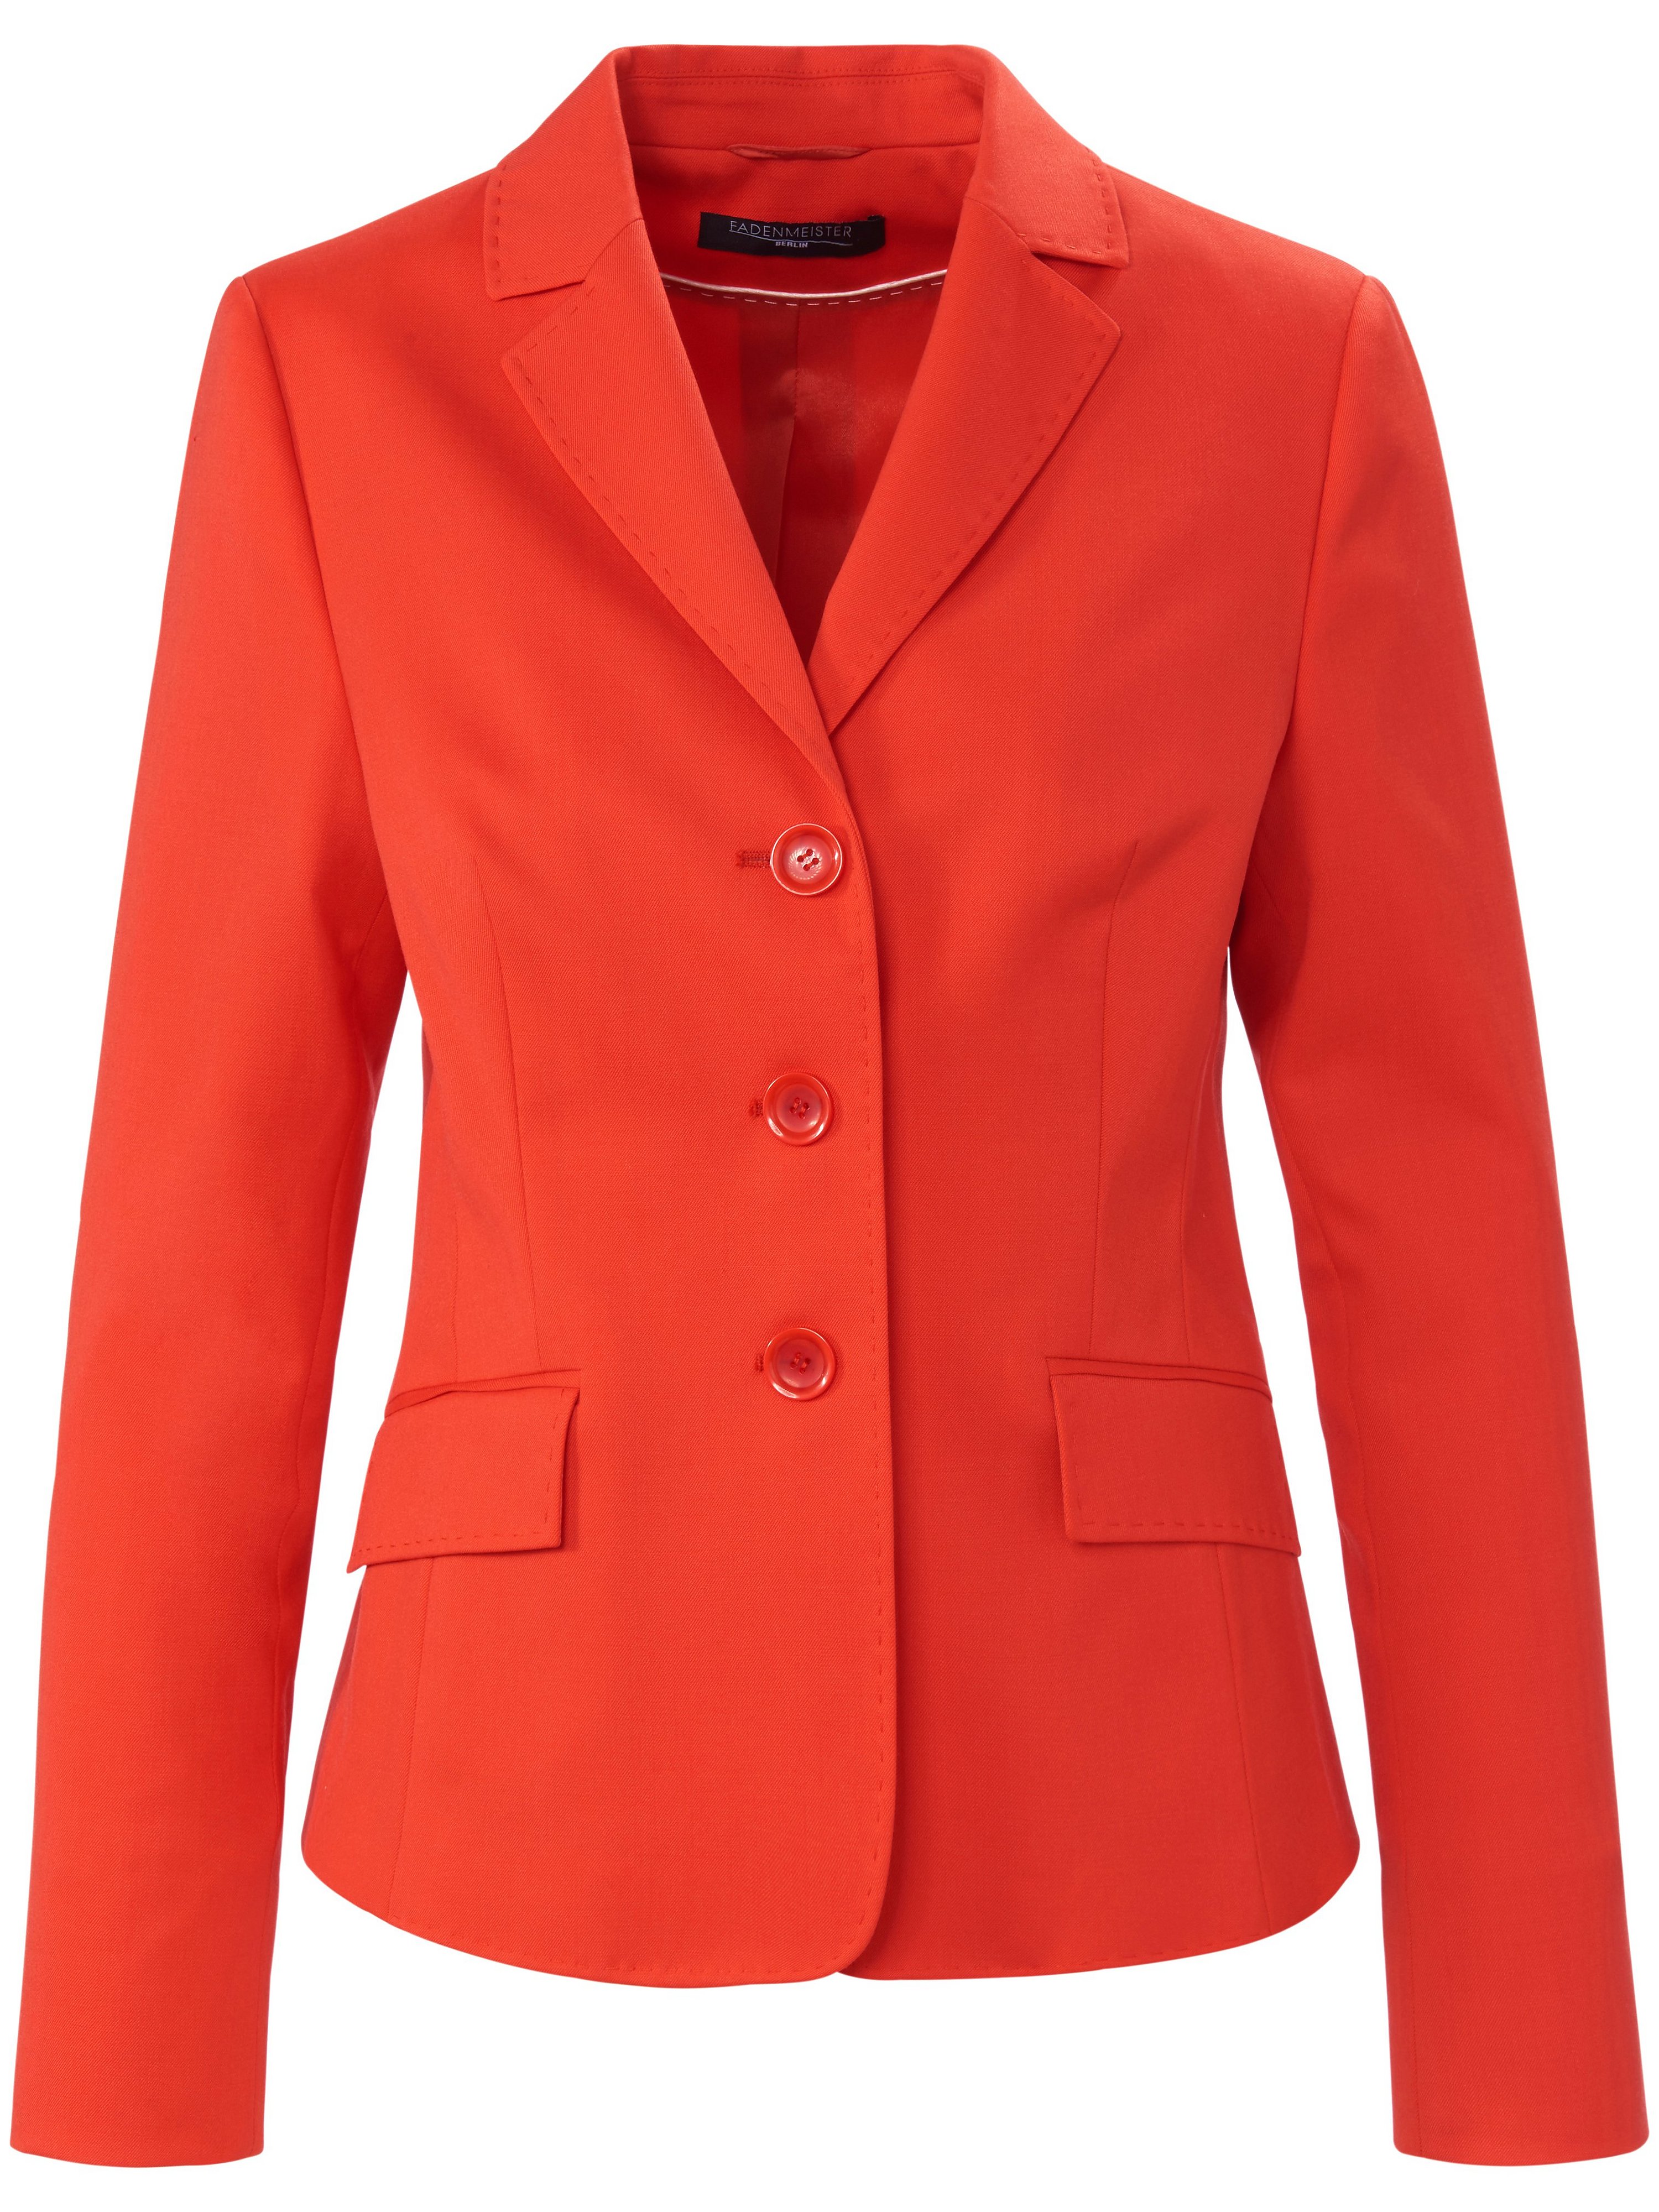 Le blazer col tailleur  Fadenmeister Berlin rouge taille 38